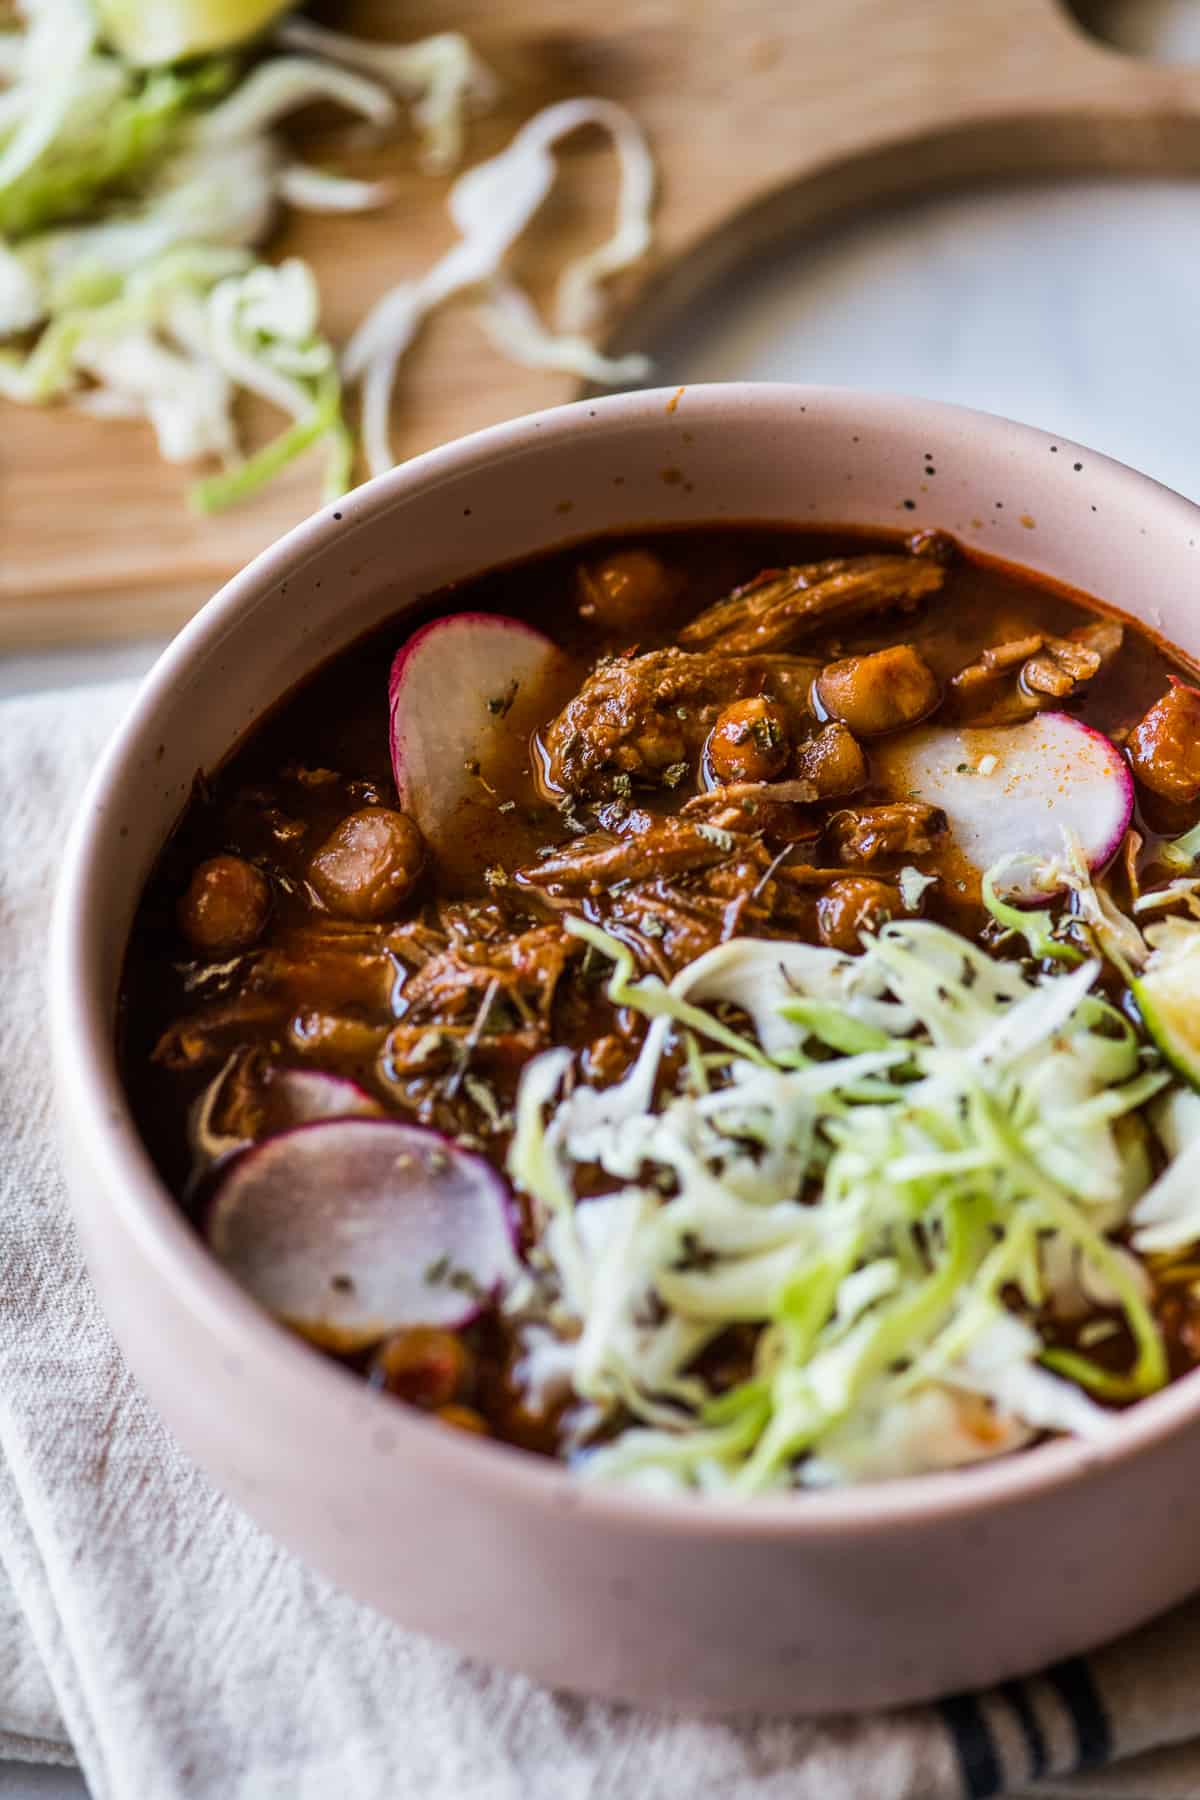 Instant Pot Pozole made with shredded pork and hominy in a red chile sauce.